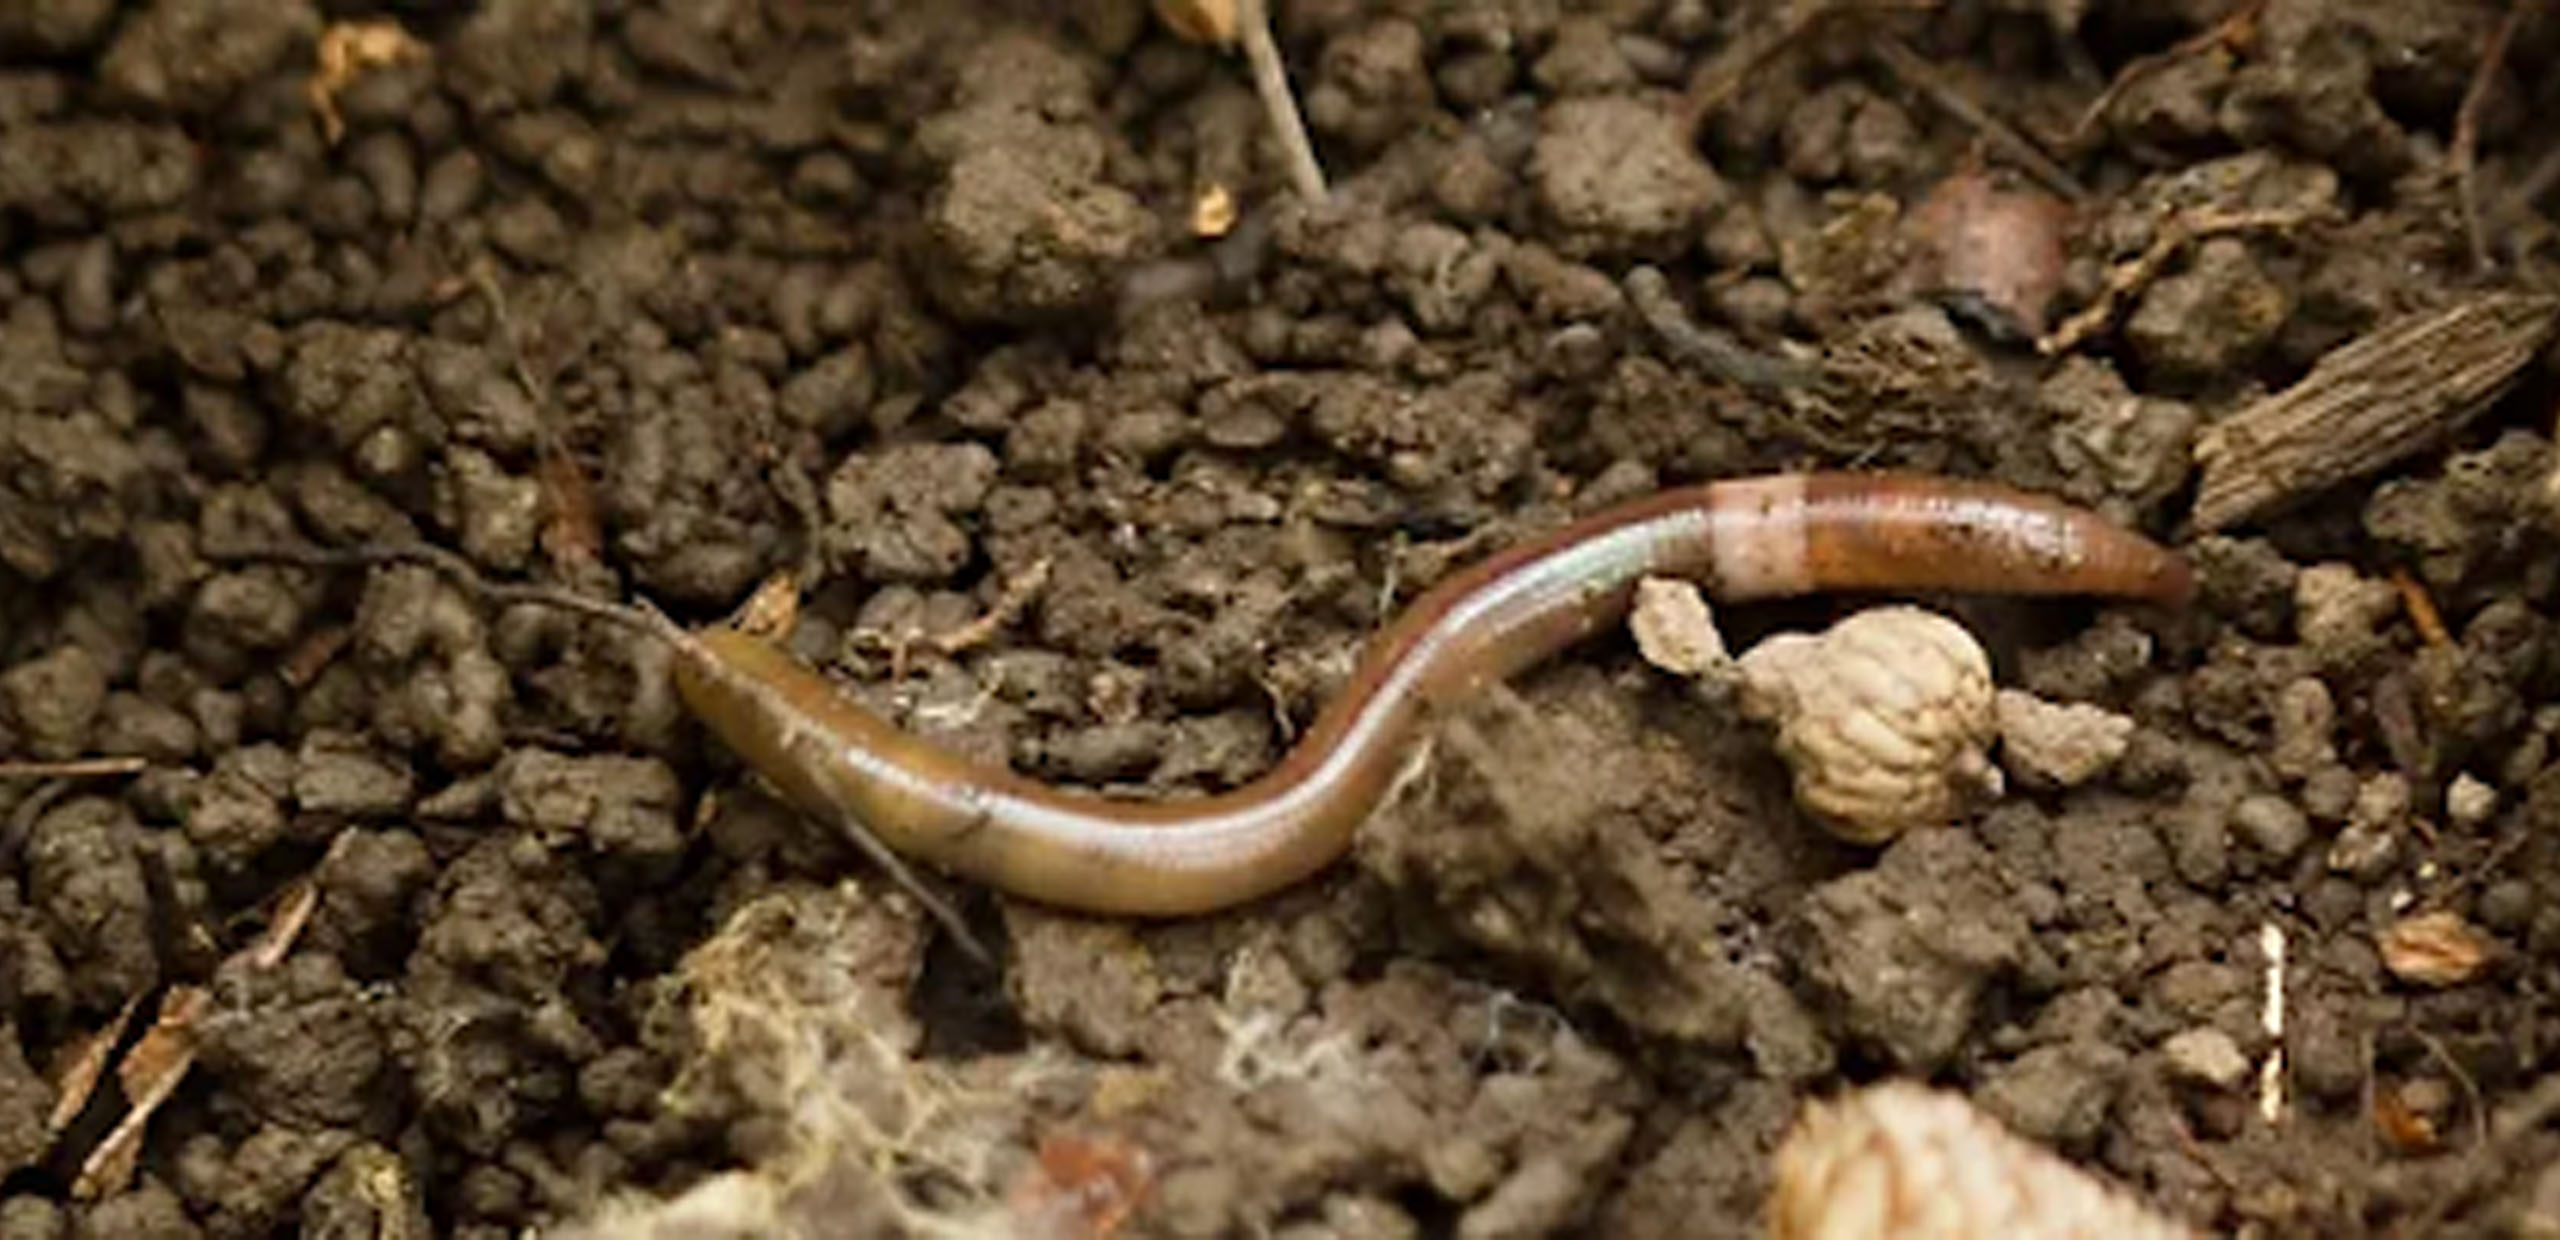 Jumping Worms in MN - What's the Big Deal?